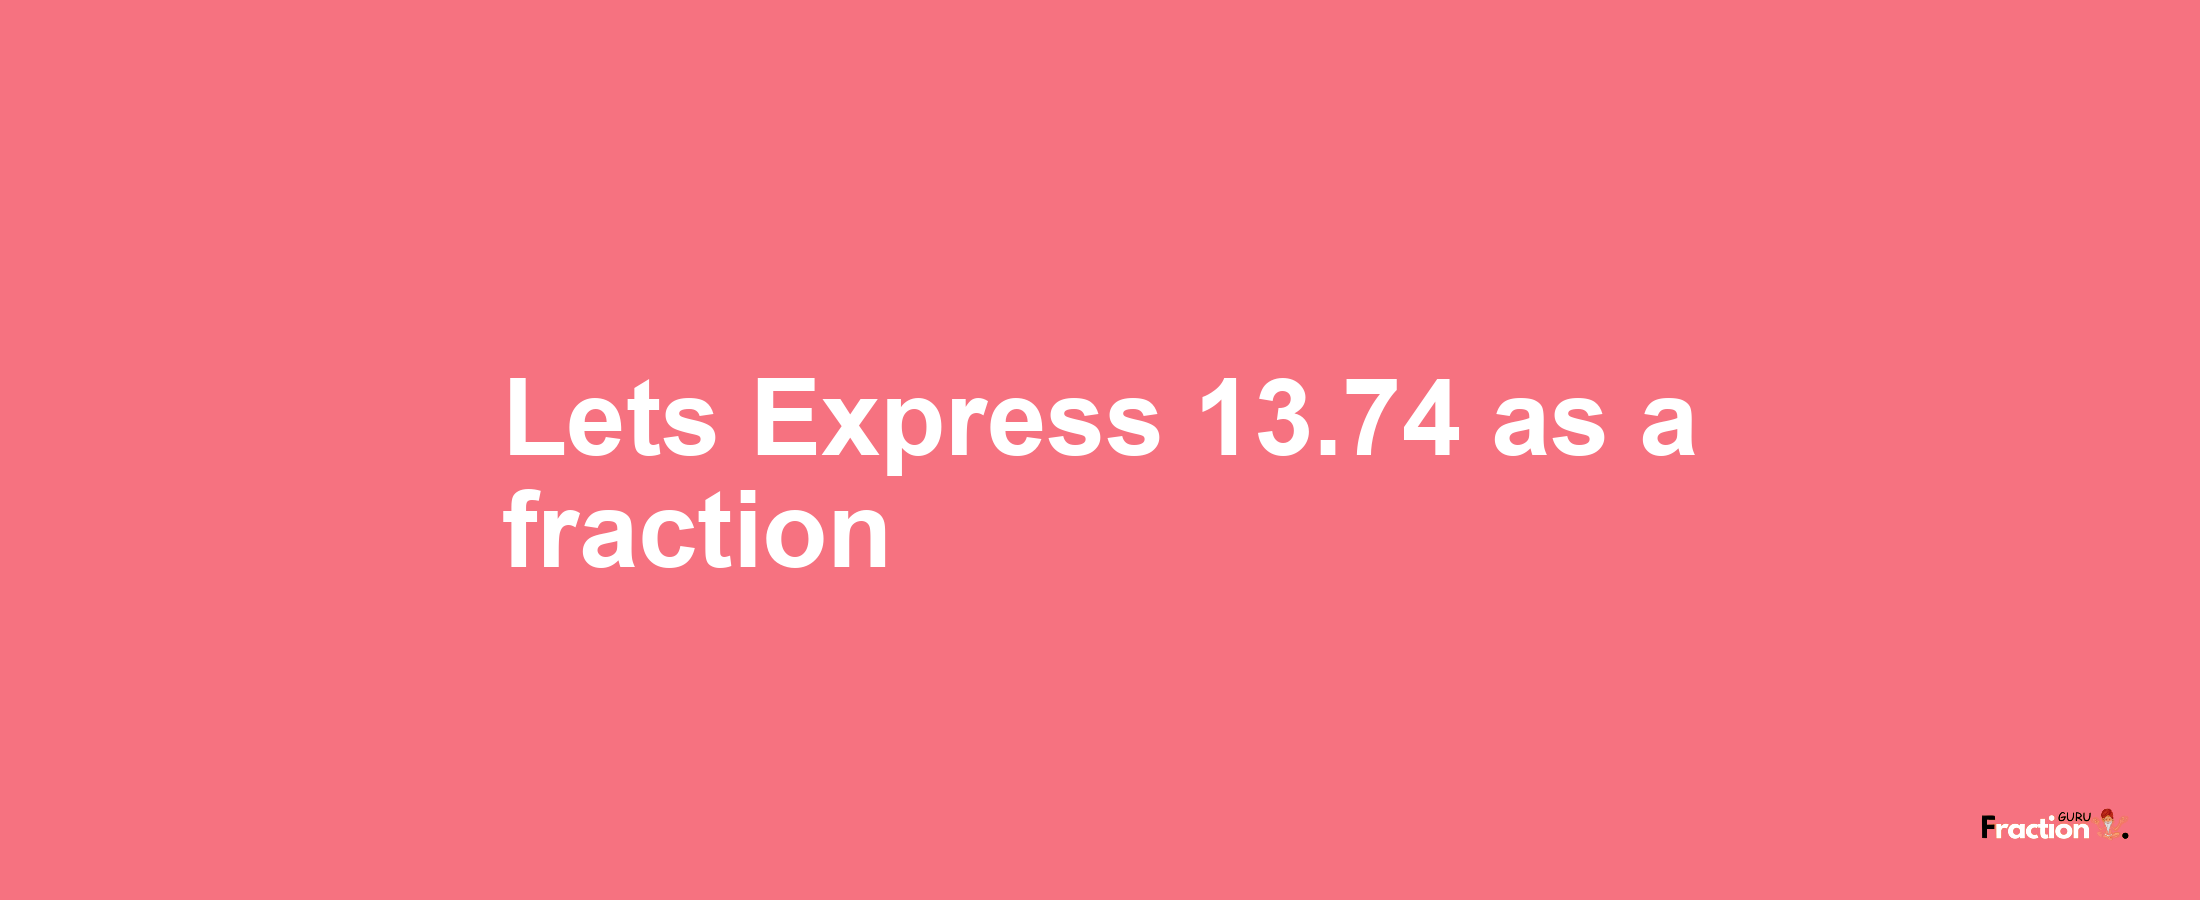 Lets Express 13.74 as afraction